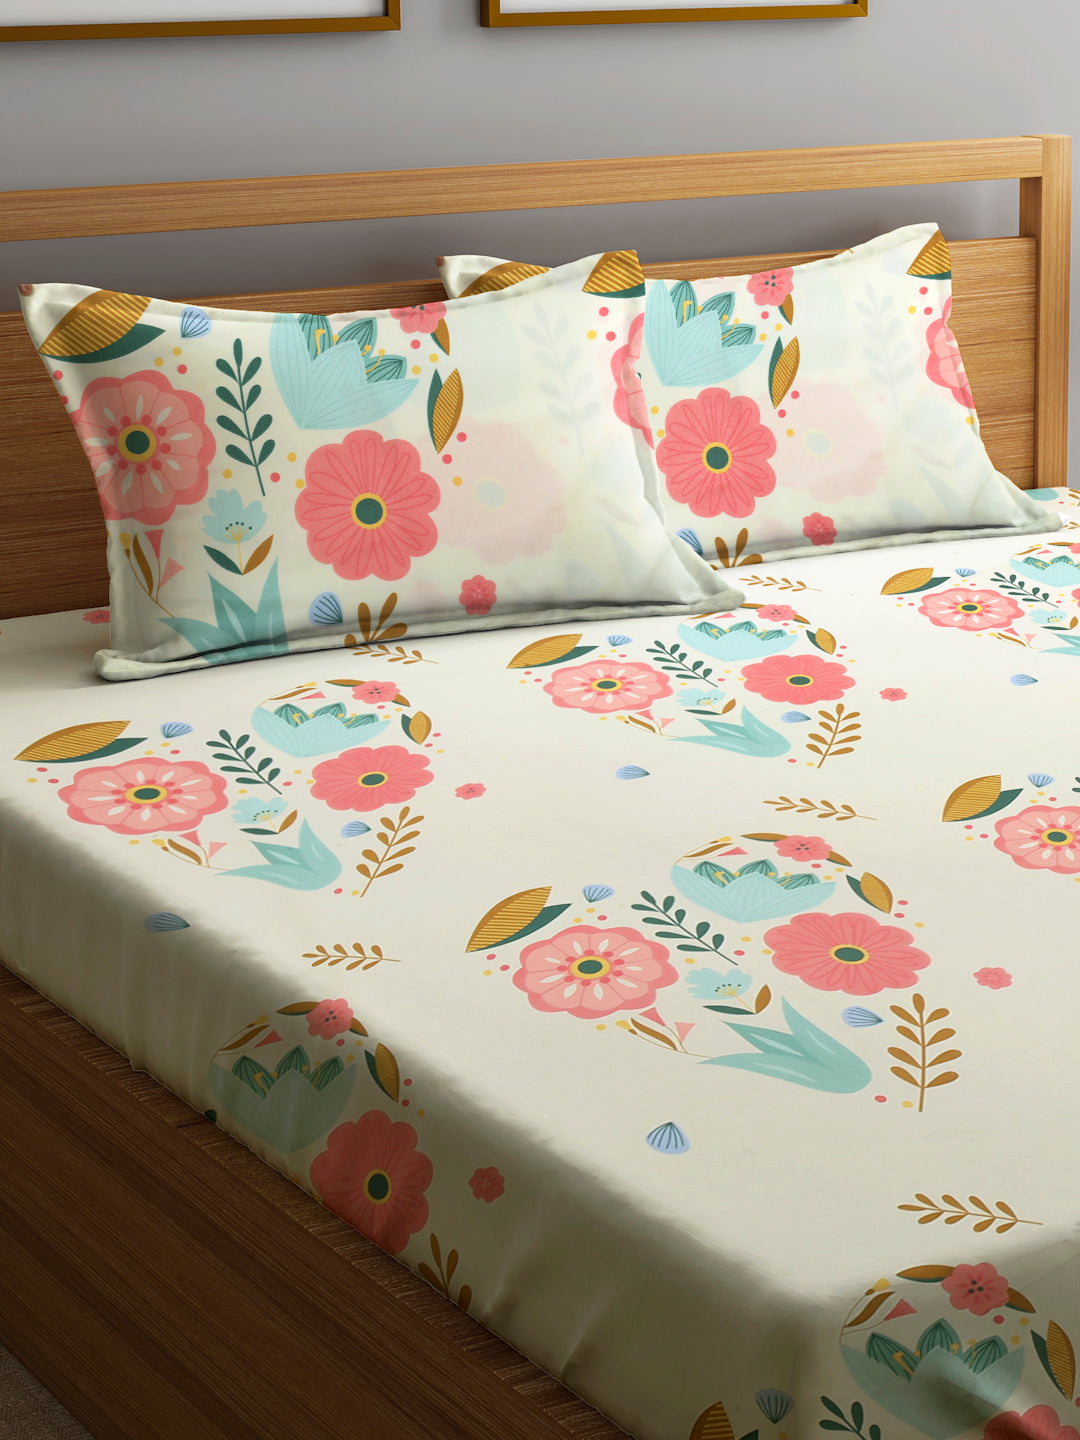 Klotthe Multi Floral 300 TC Cotton Blend Elasticated Double Bedsheet with 2 Pillow Cover in Book Fold Pack